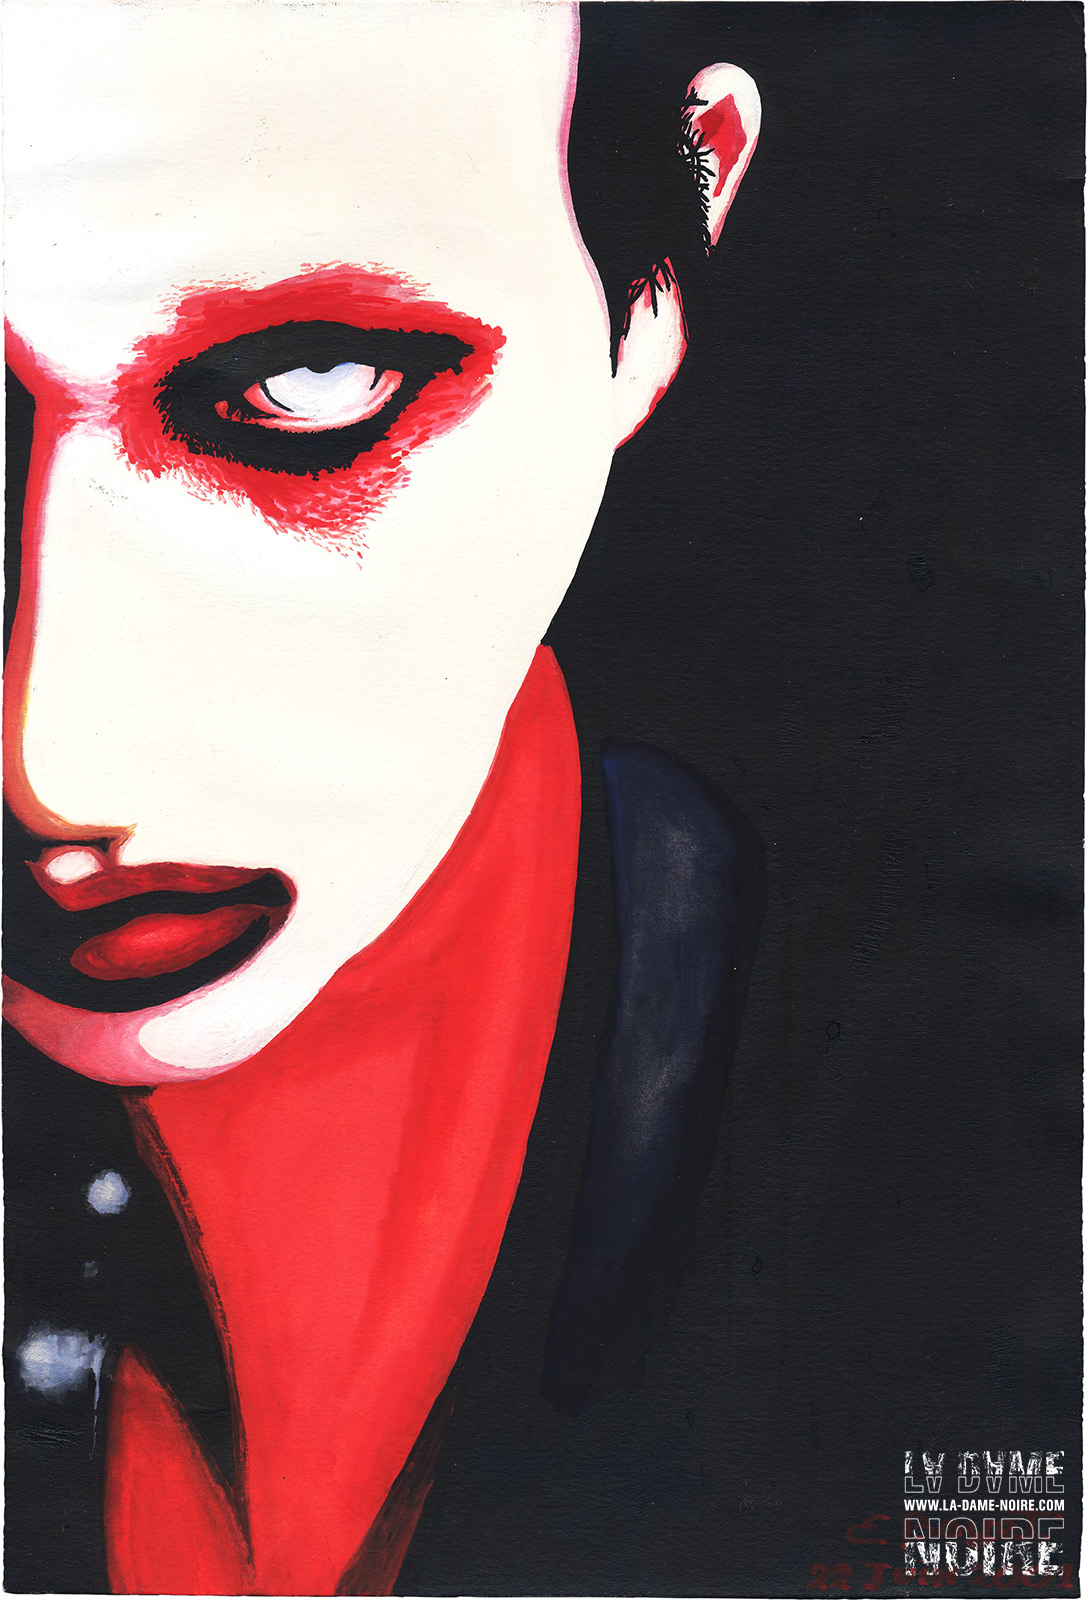 Marilyn Manson's portrait painted with Gouache